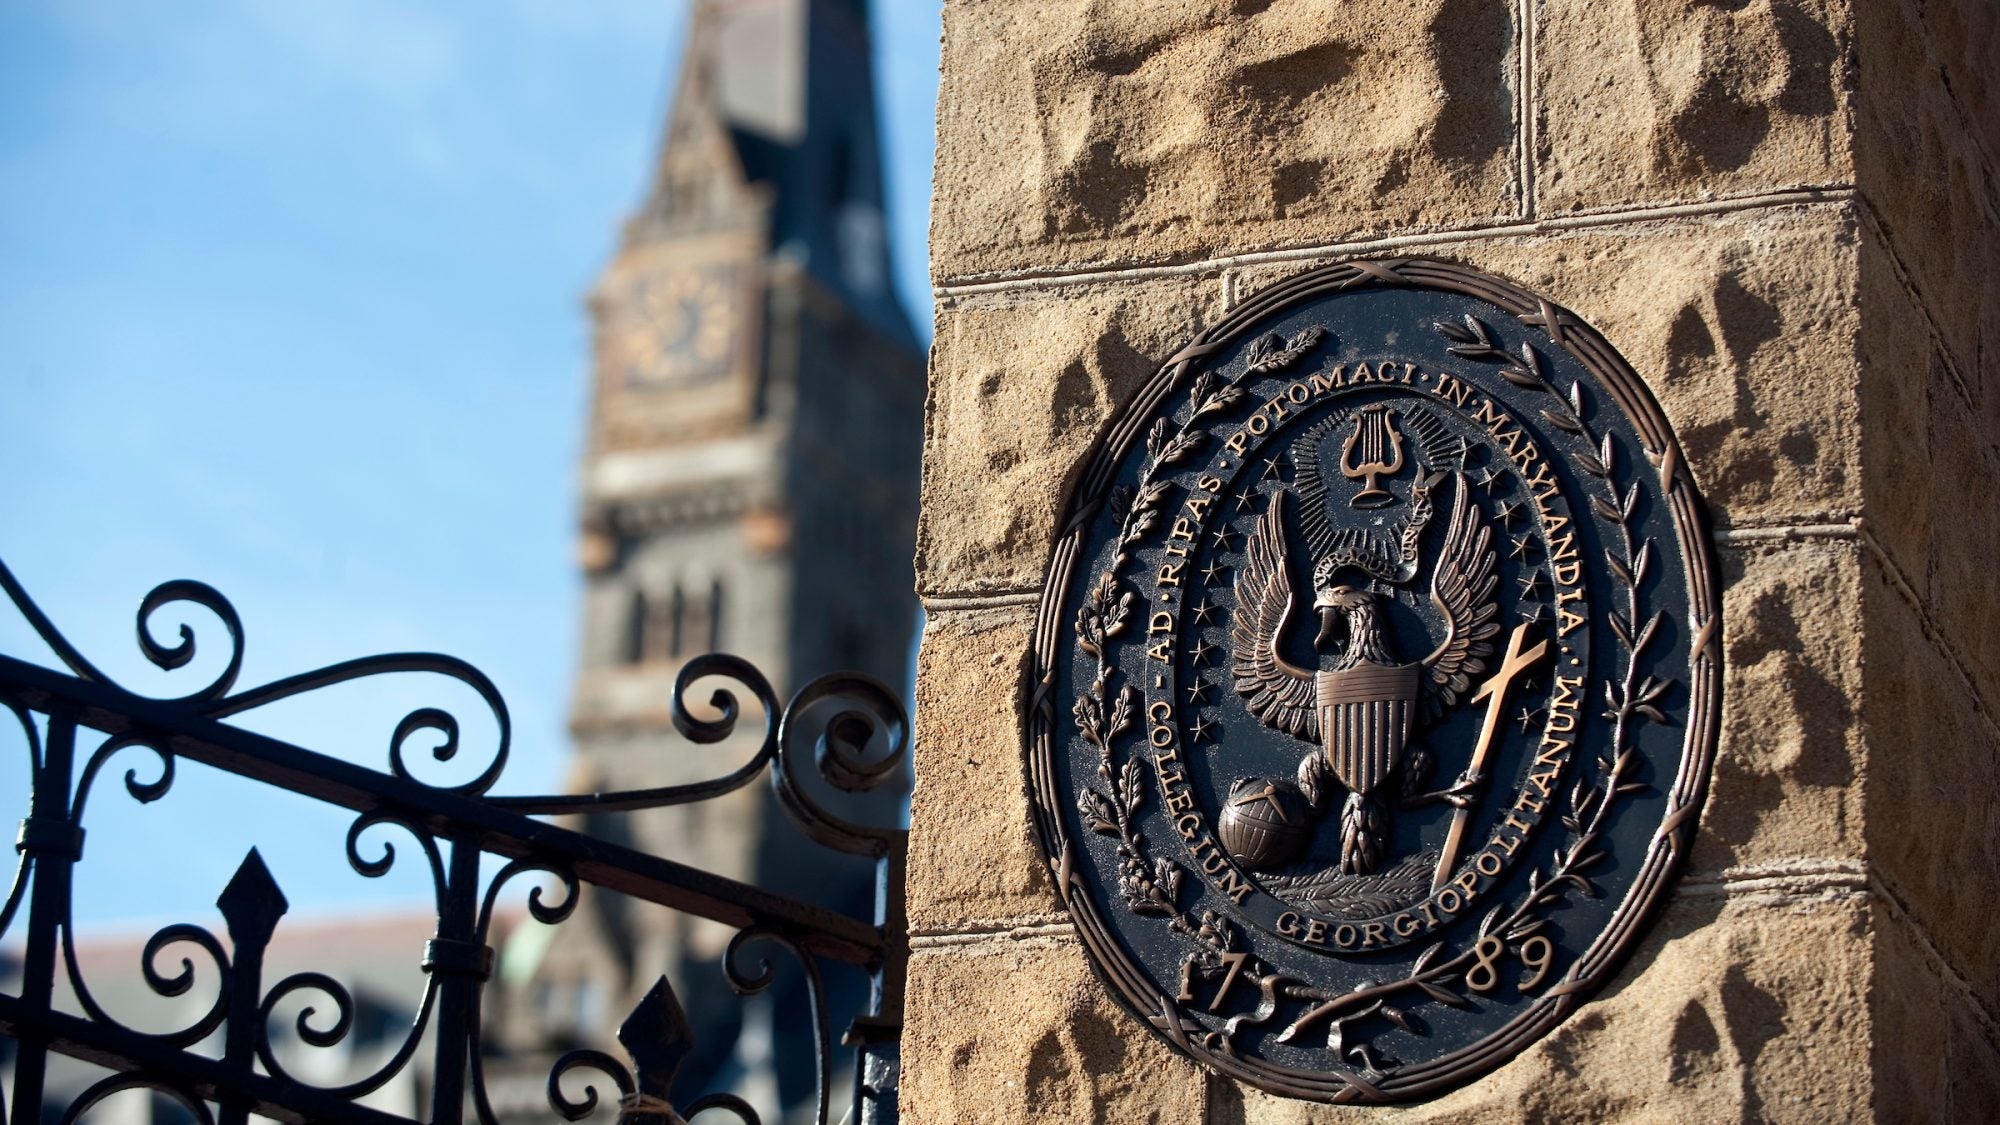 Georgetown seal, set in metal included on campus gates.